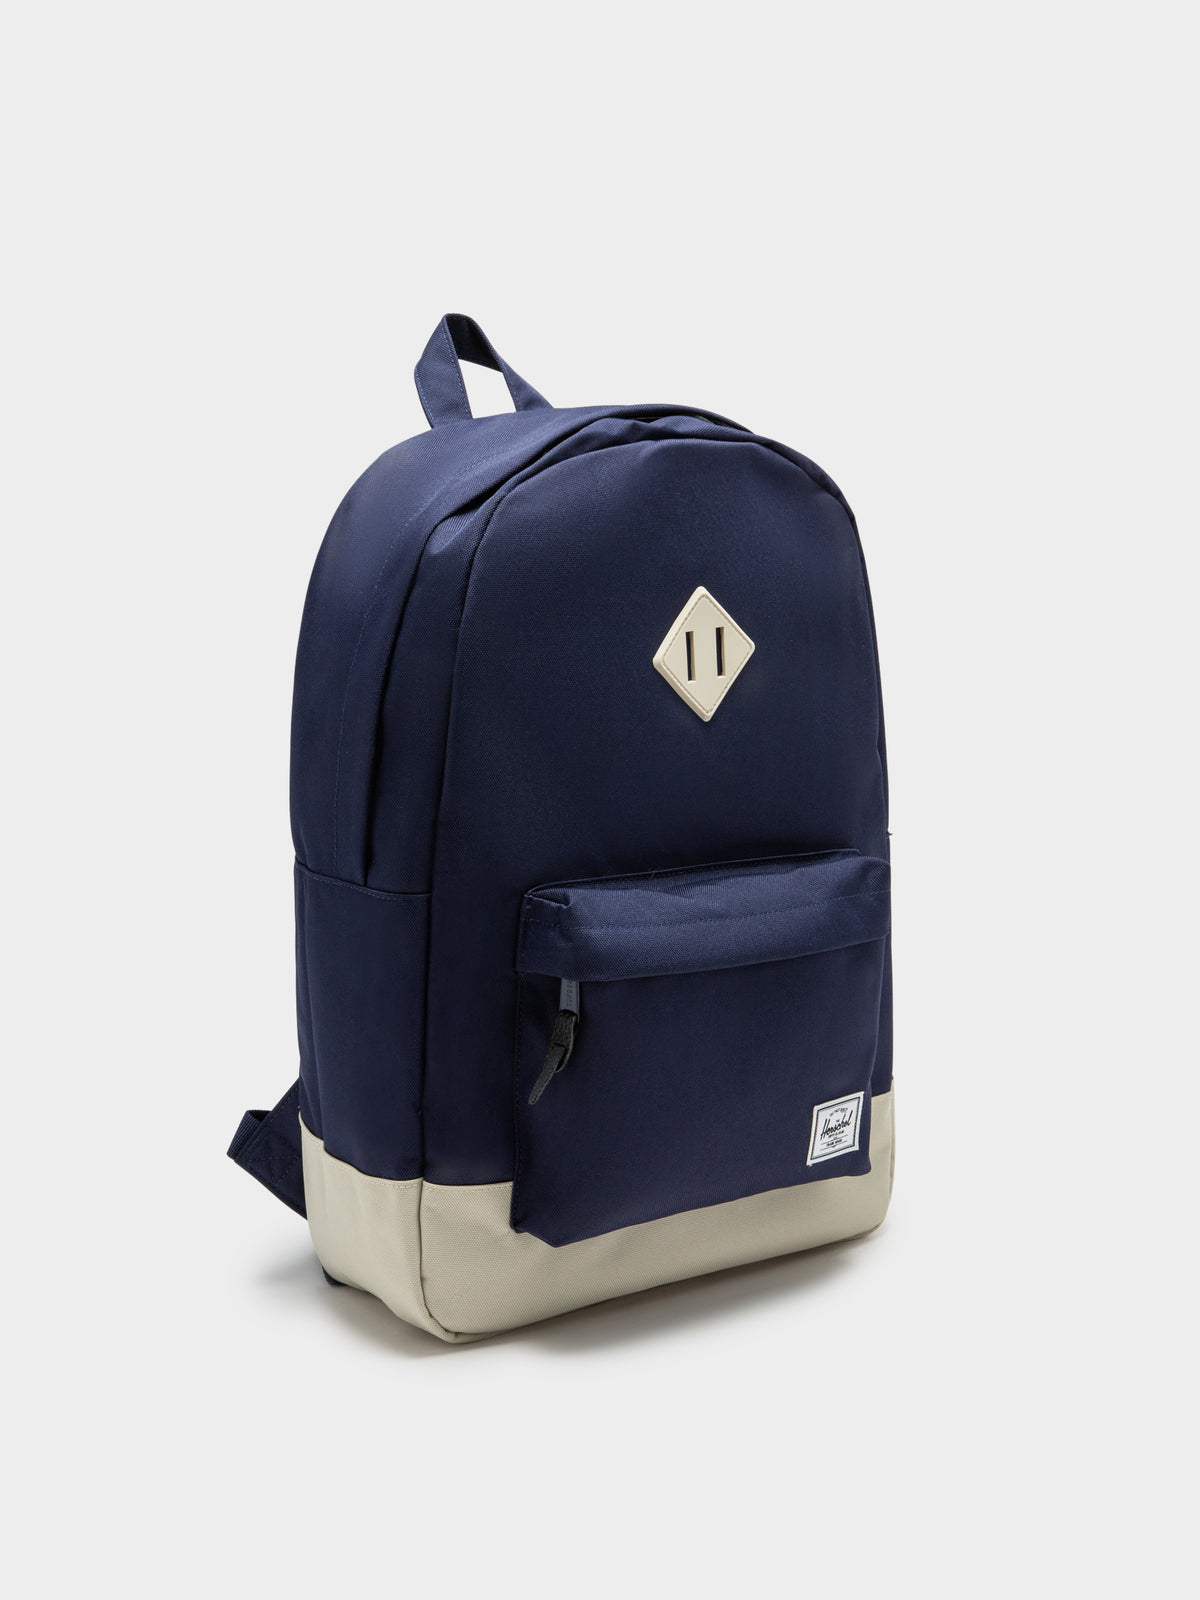 Heritage Backpack in Peacoat Navy &amp; White